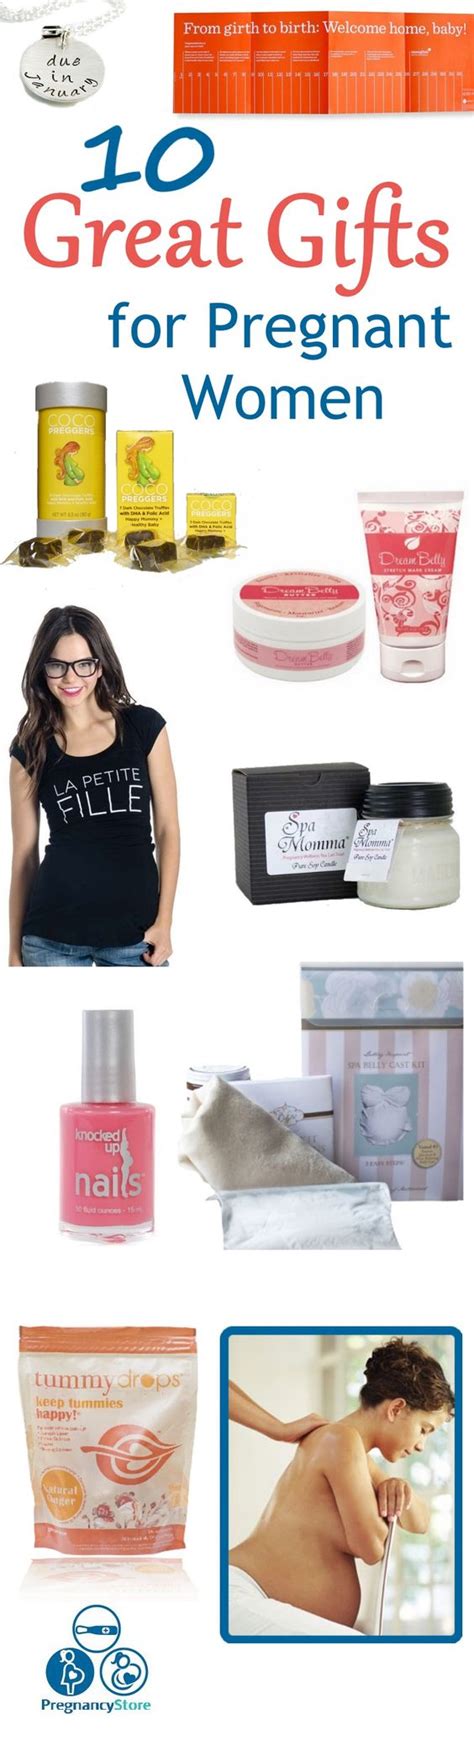 At gifteclipse.com find thousands of gifts for categorized into thousands of categories. Gifts for pregnant women, Great gifts and Gifts on Pinterest